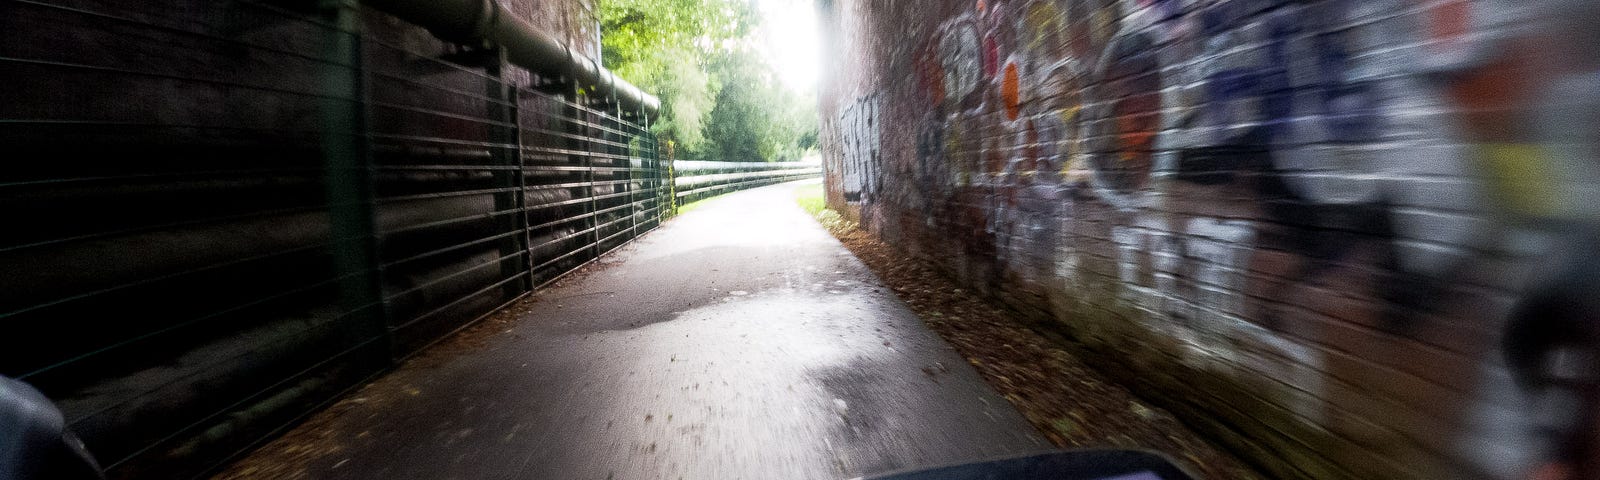 On the cycle path that connects Nordsternpark and Zollverein, two defunct coal mines in the area. Essen, Germany, August 6, 2023.